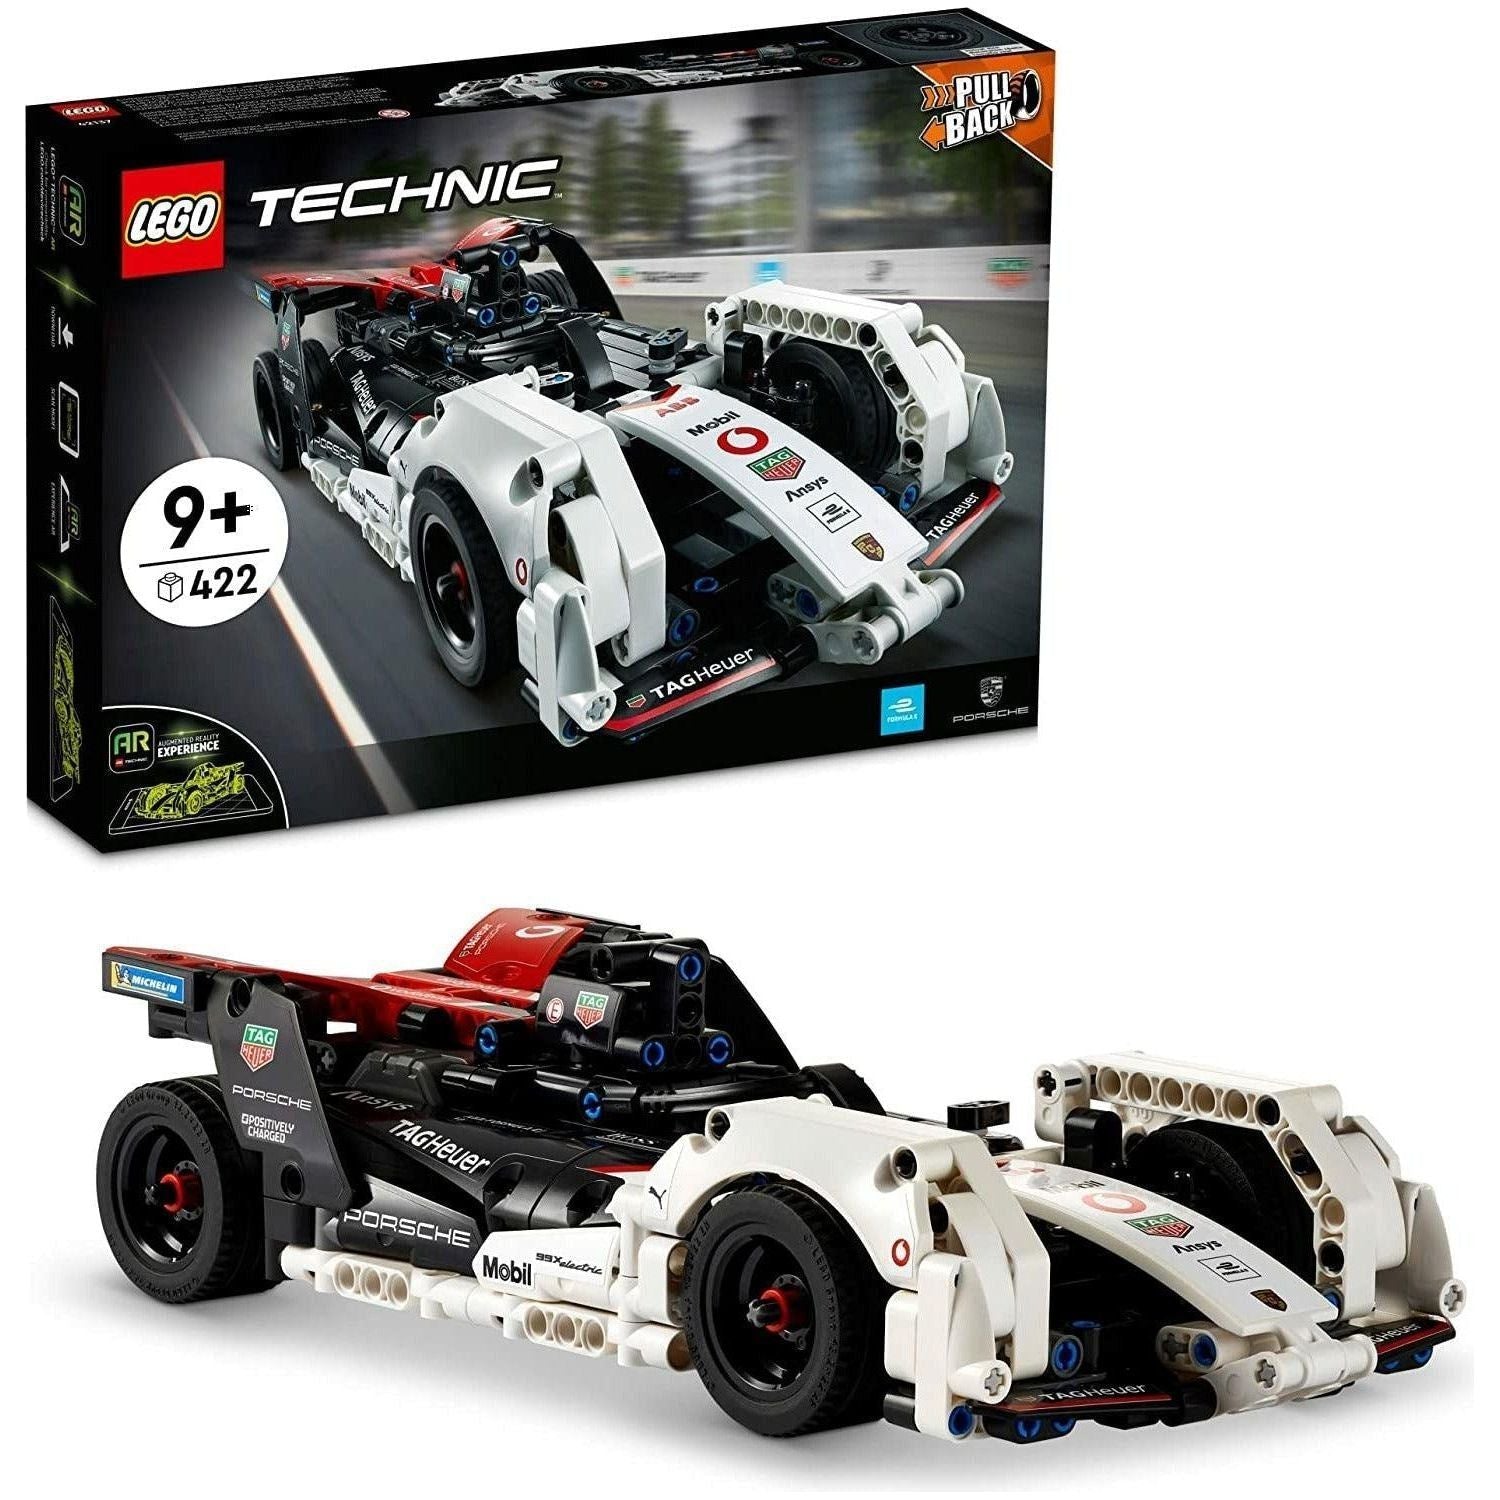 LEGO Technic Formula E Porsche 99X Electric 42137 Model Building Kit; Pull-Back Race Car (422 Pieces) - BumbleToys - 8+ Years, 8-13 Years, Boys, Cars, LEGO, OXE, Pre-Order, Technic